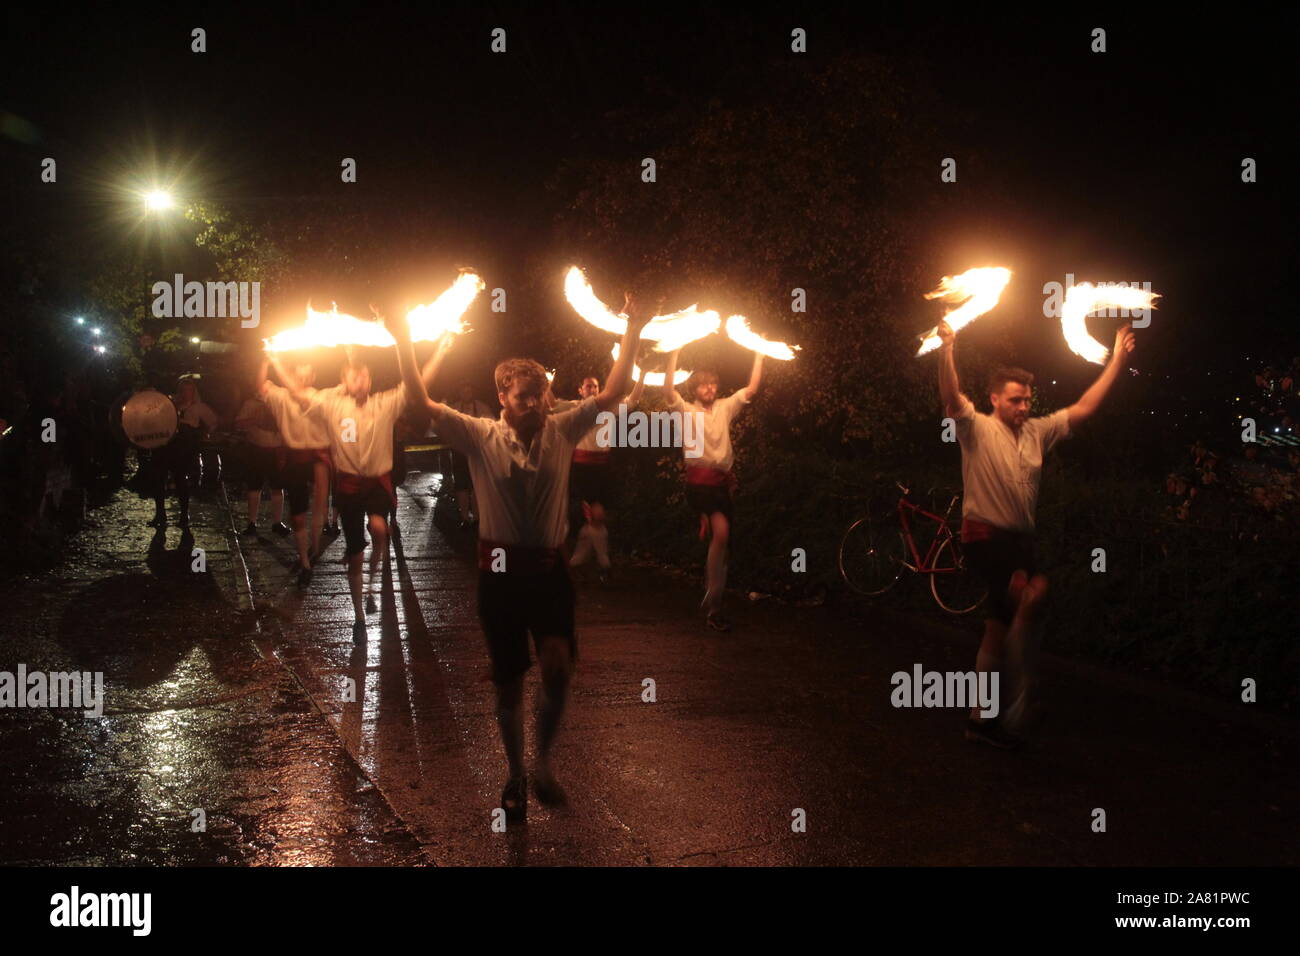 Newcastle upon Tyne, UK. 5th Nov, 2019. Kingsman fire dance a traditional folk celebration on Guy Fawkes night at the Cumberland Arms Pub, Credit: DavidWhinham/AlamyLive Credit: David Whinham/Alamy Live News Stock Photo